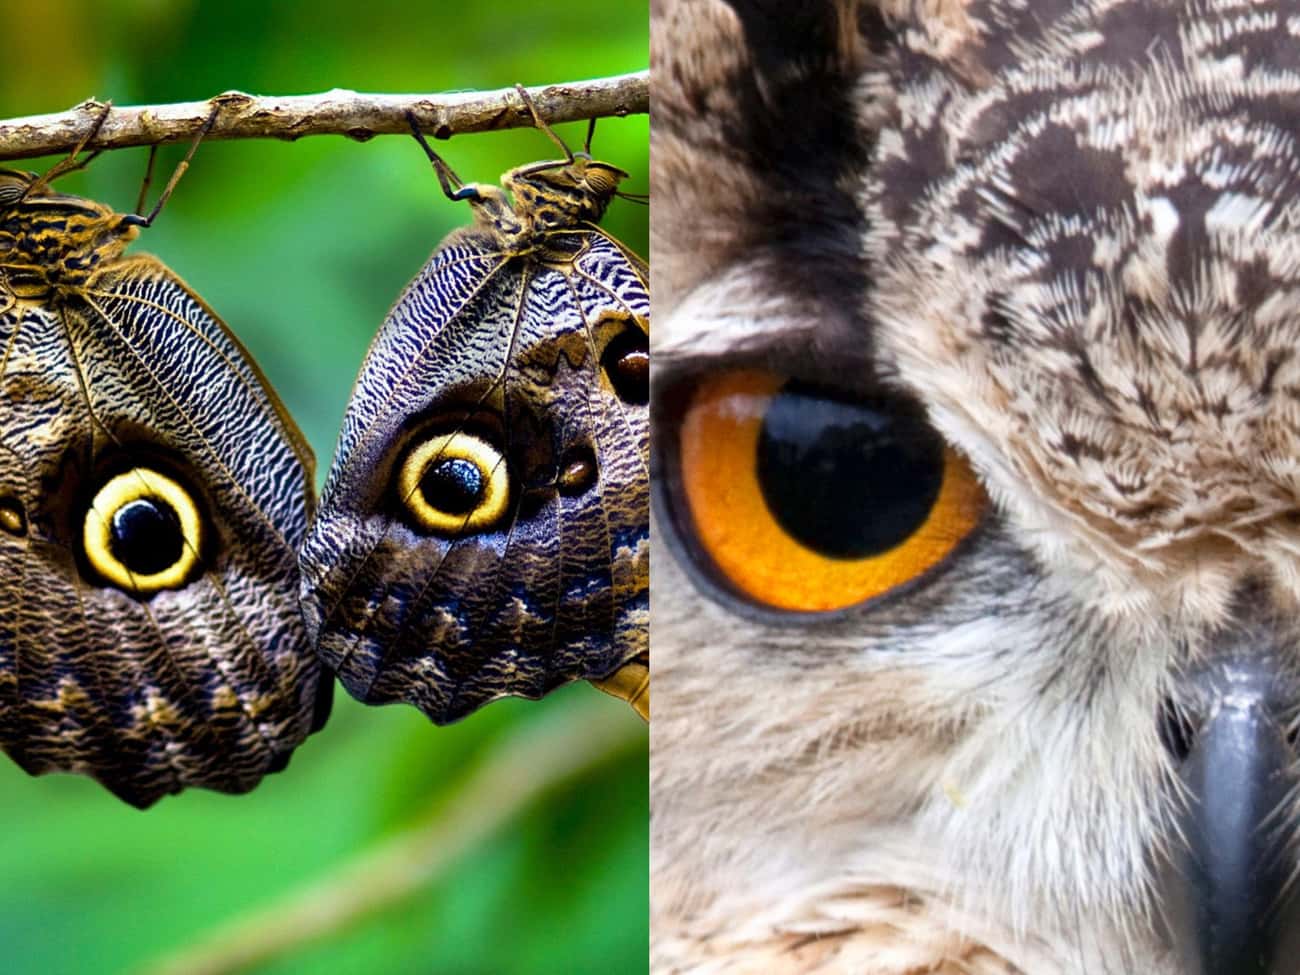 The Eyespots On Some Butterflies Are Meant To Mimic The Gaze Of Predators